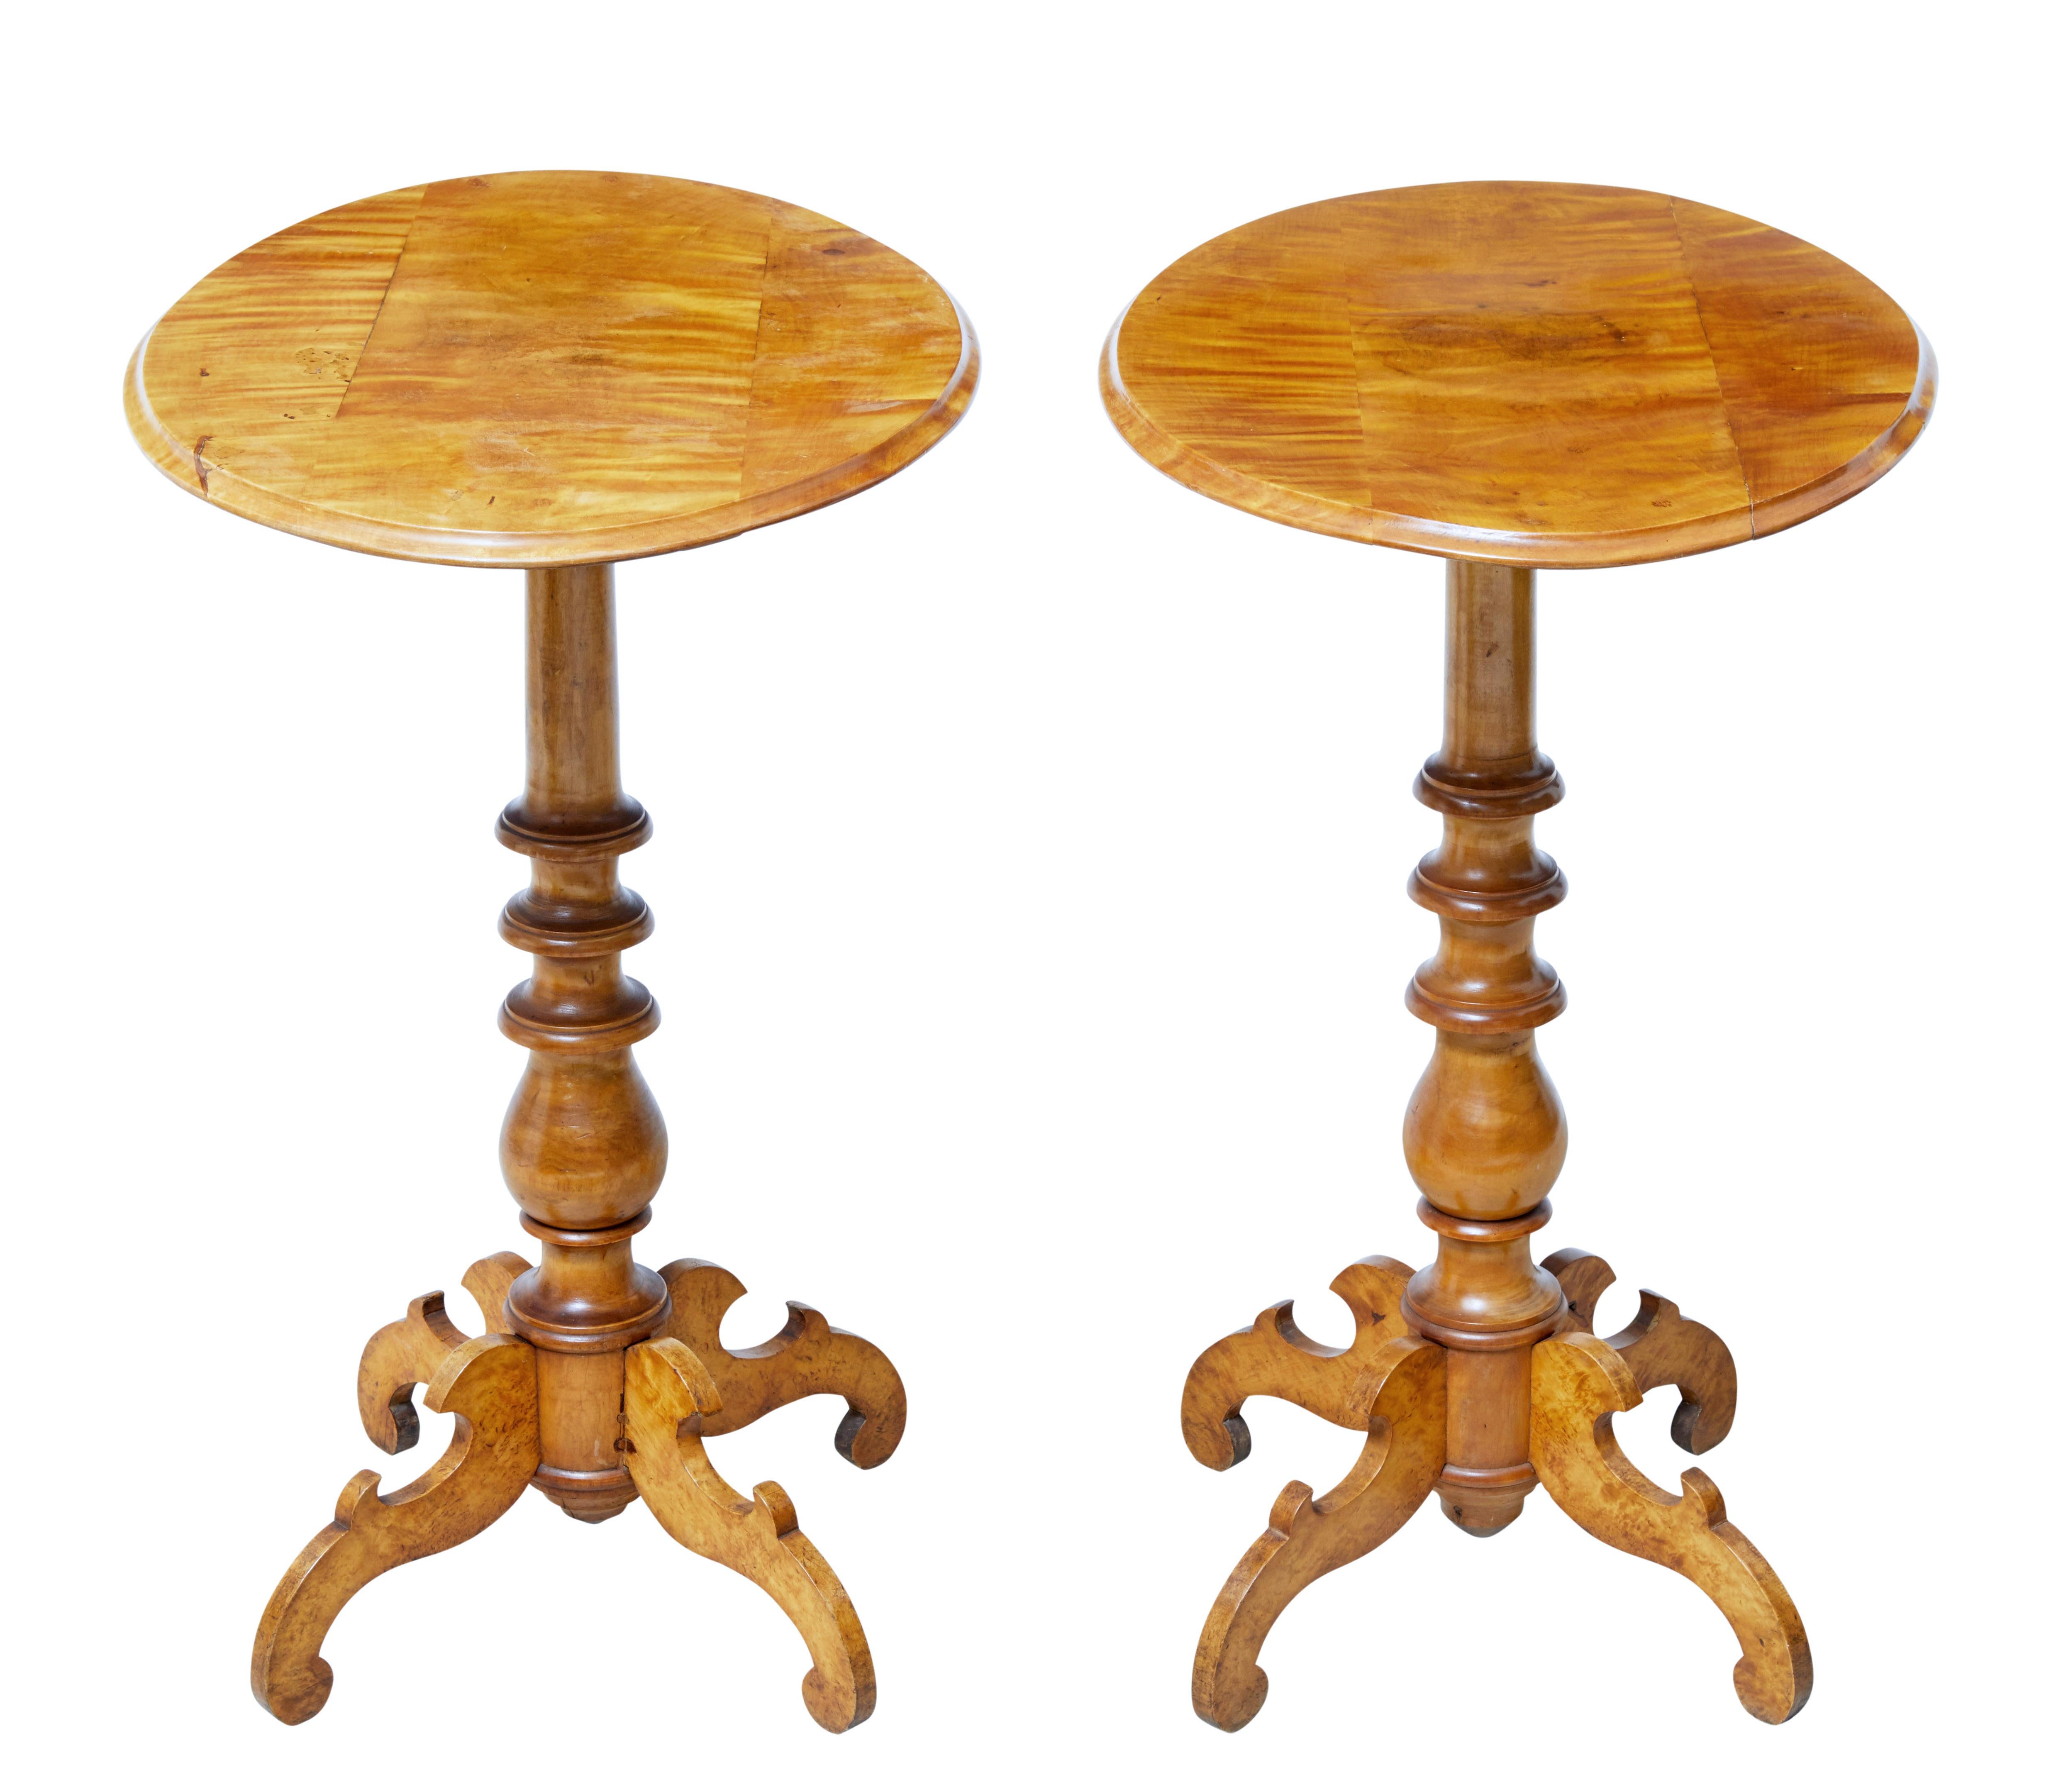 Fine pair of oval top Swedish birch occasional tables circa 1890.

Elegant pair of occasional tables with multiple uses. Good rich birch colour.

Oval tops with turned stem, standing on 4 scrolled legs.

Slight difference in colour between the